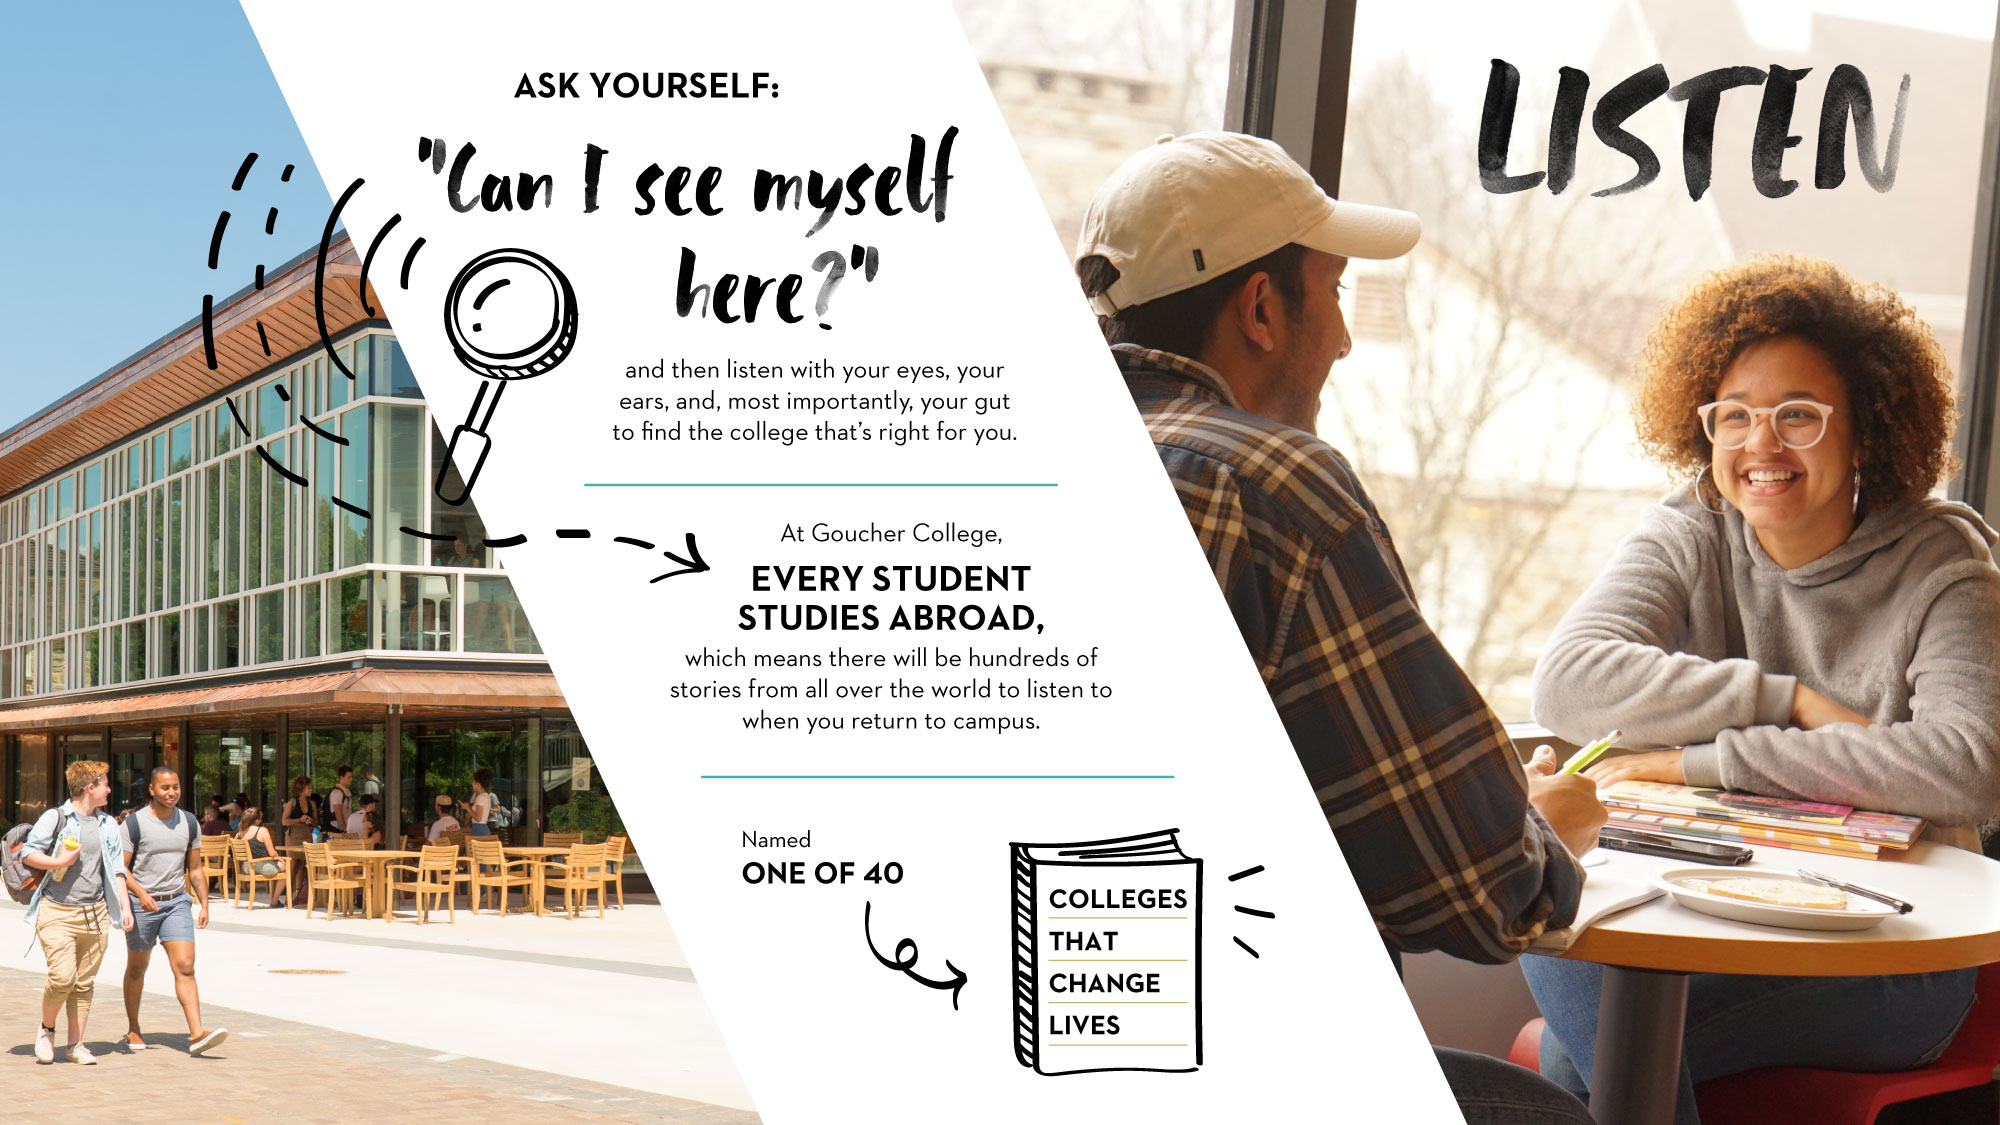 Every Student Student Studies Abroad - which means there will be hundreds of stories from all over the world to listen to when you return to campus.